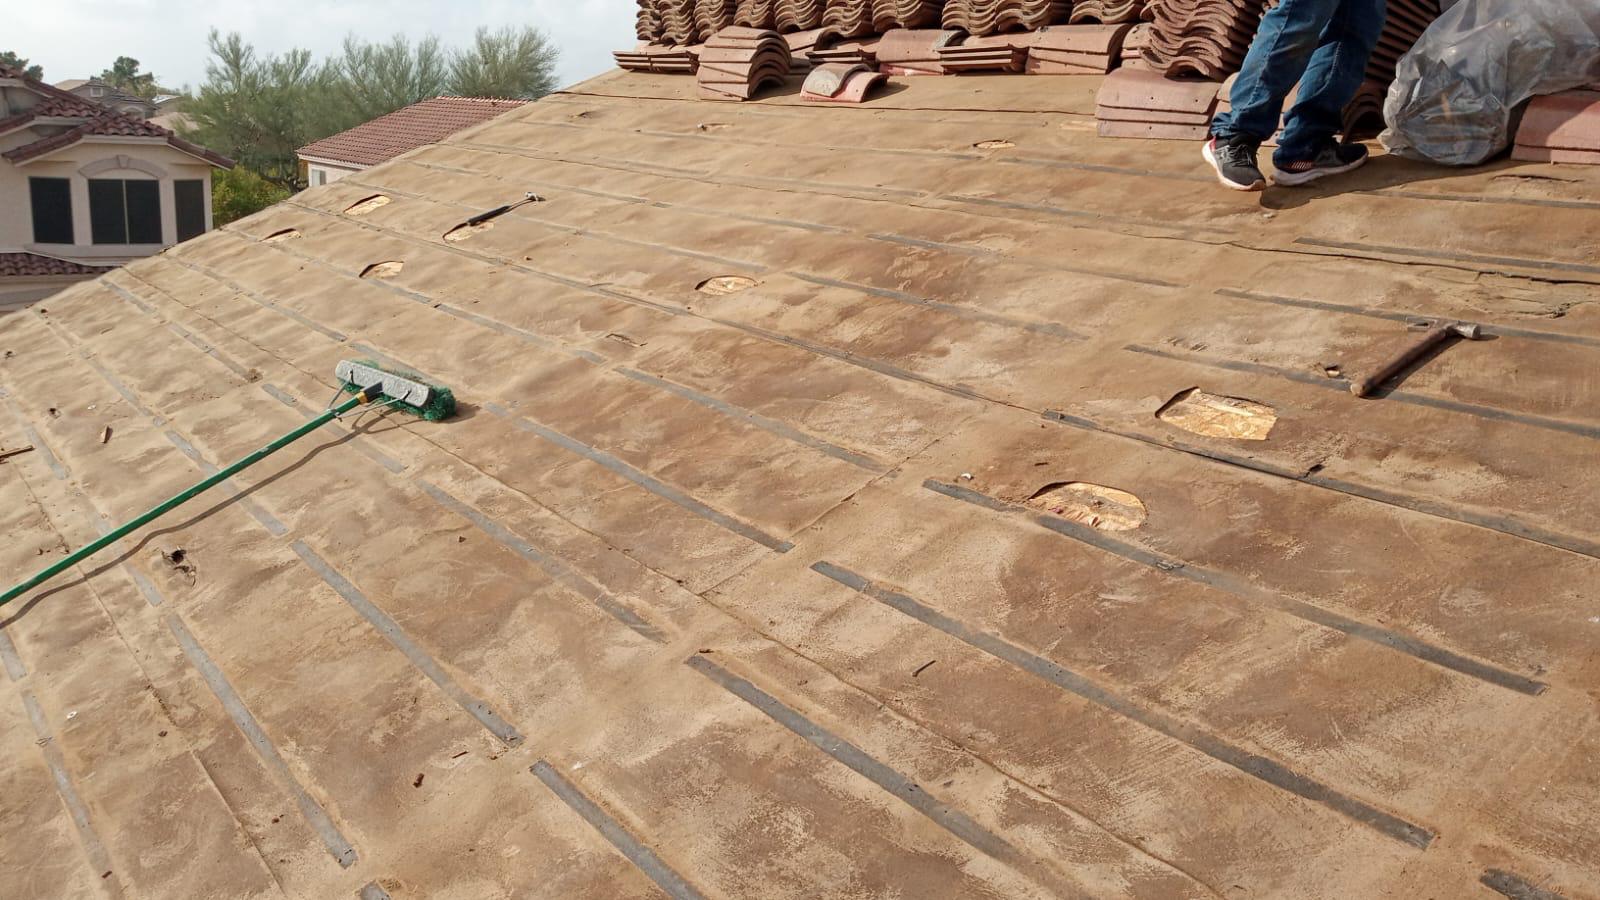 Underlayment set for tile re-roofing project in Gilbert.